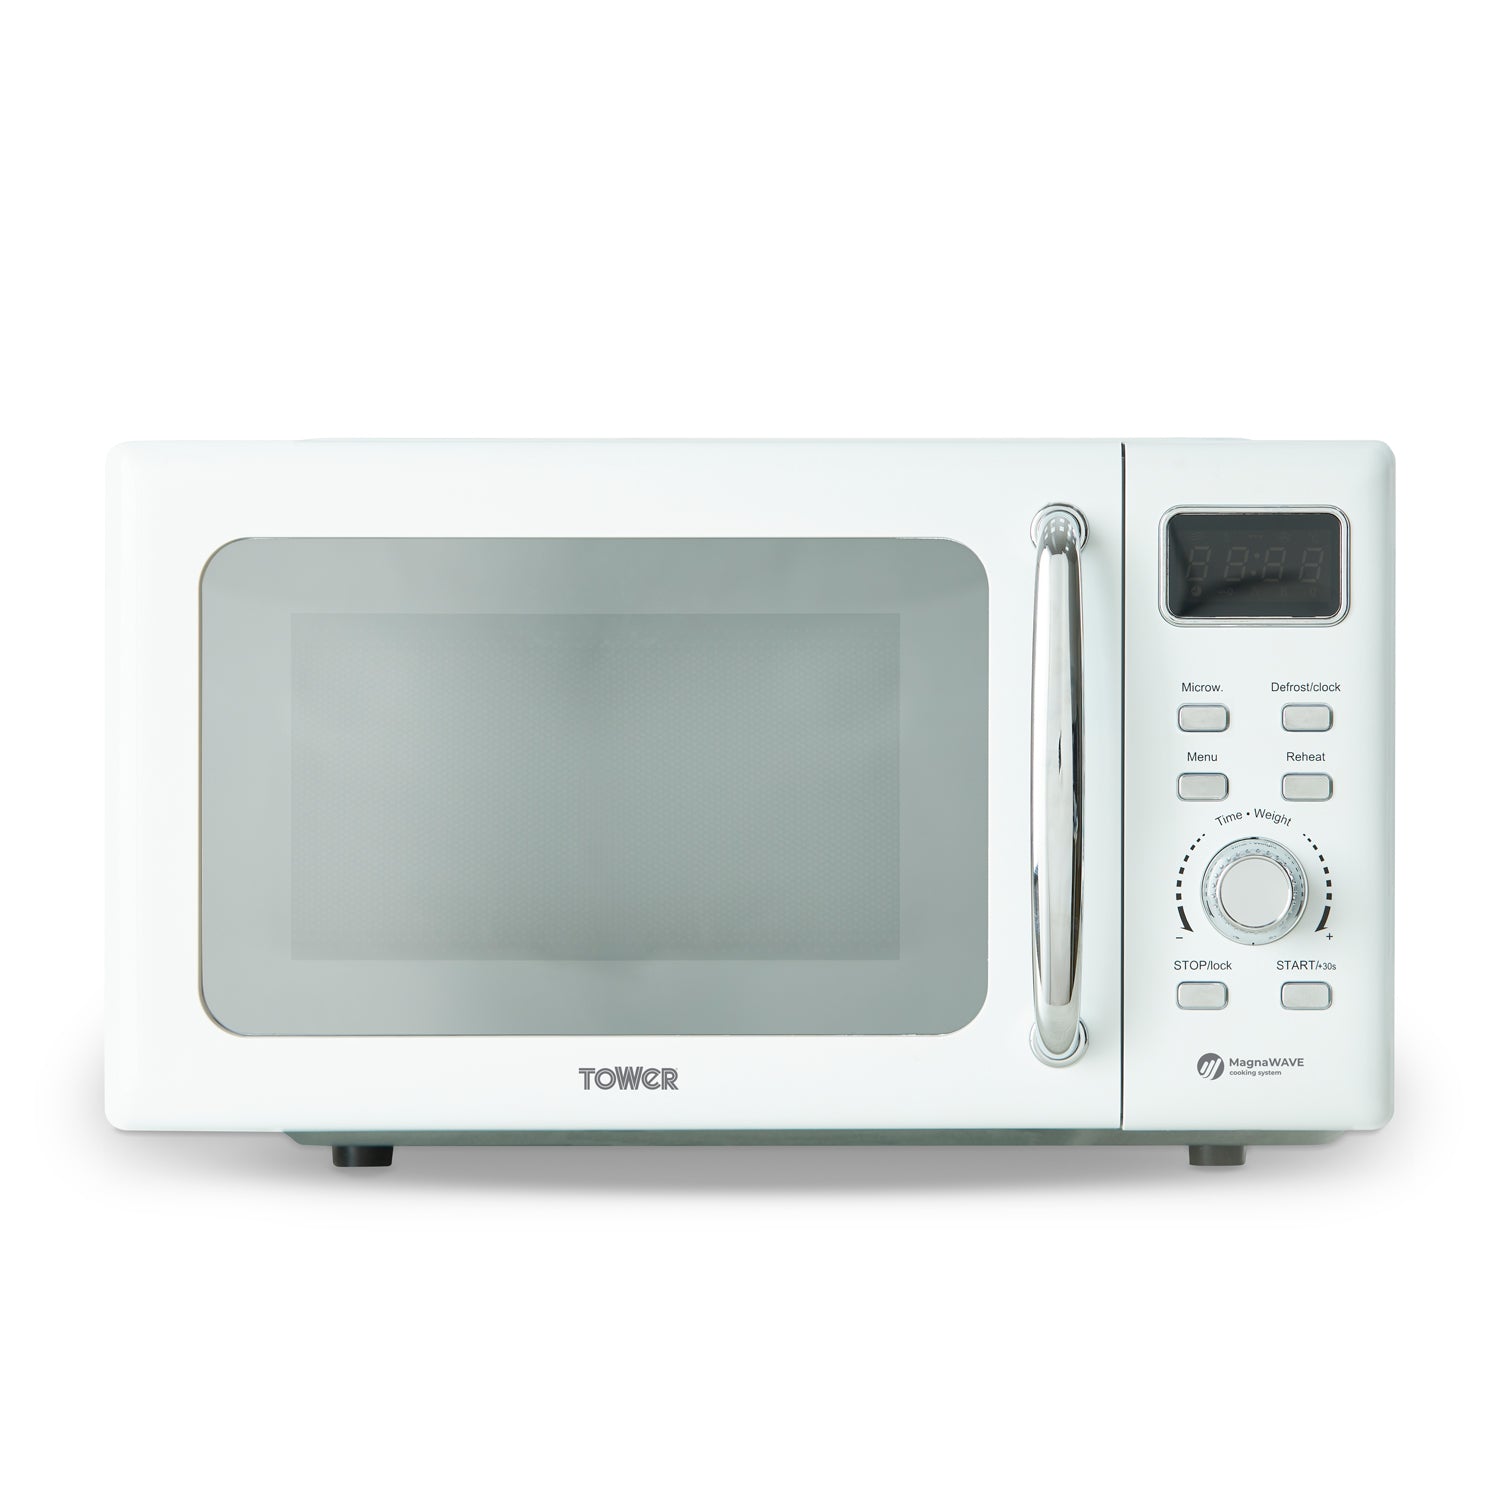 Tower 20L 800W White & Chrome Digital Microwave Oven